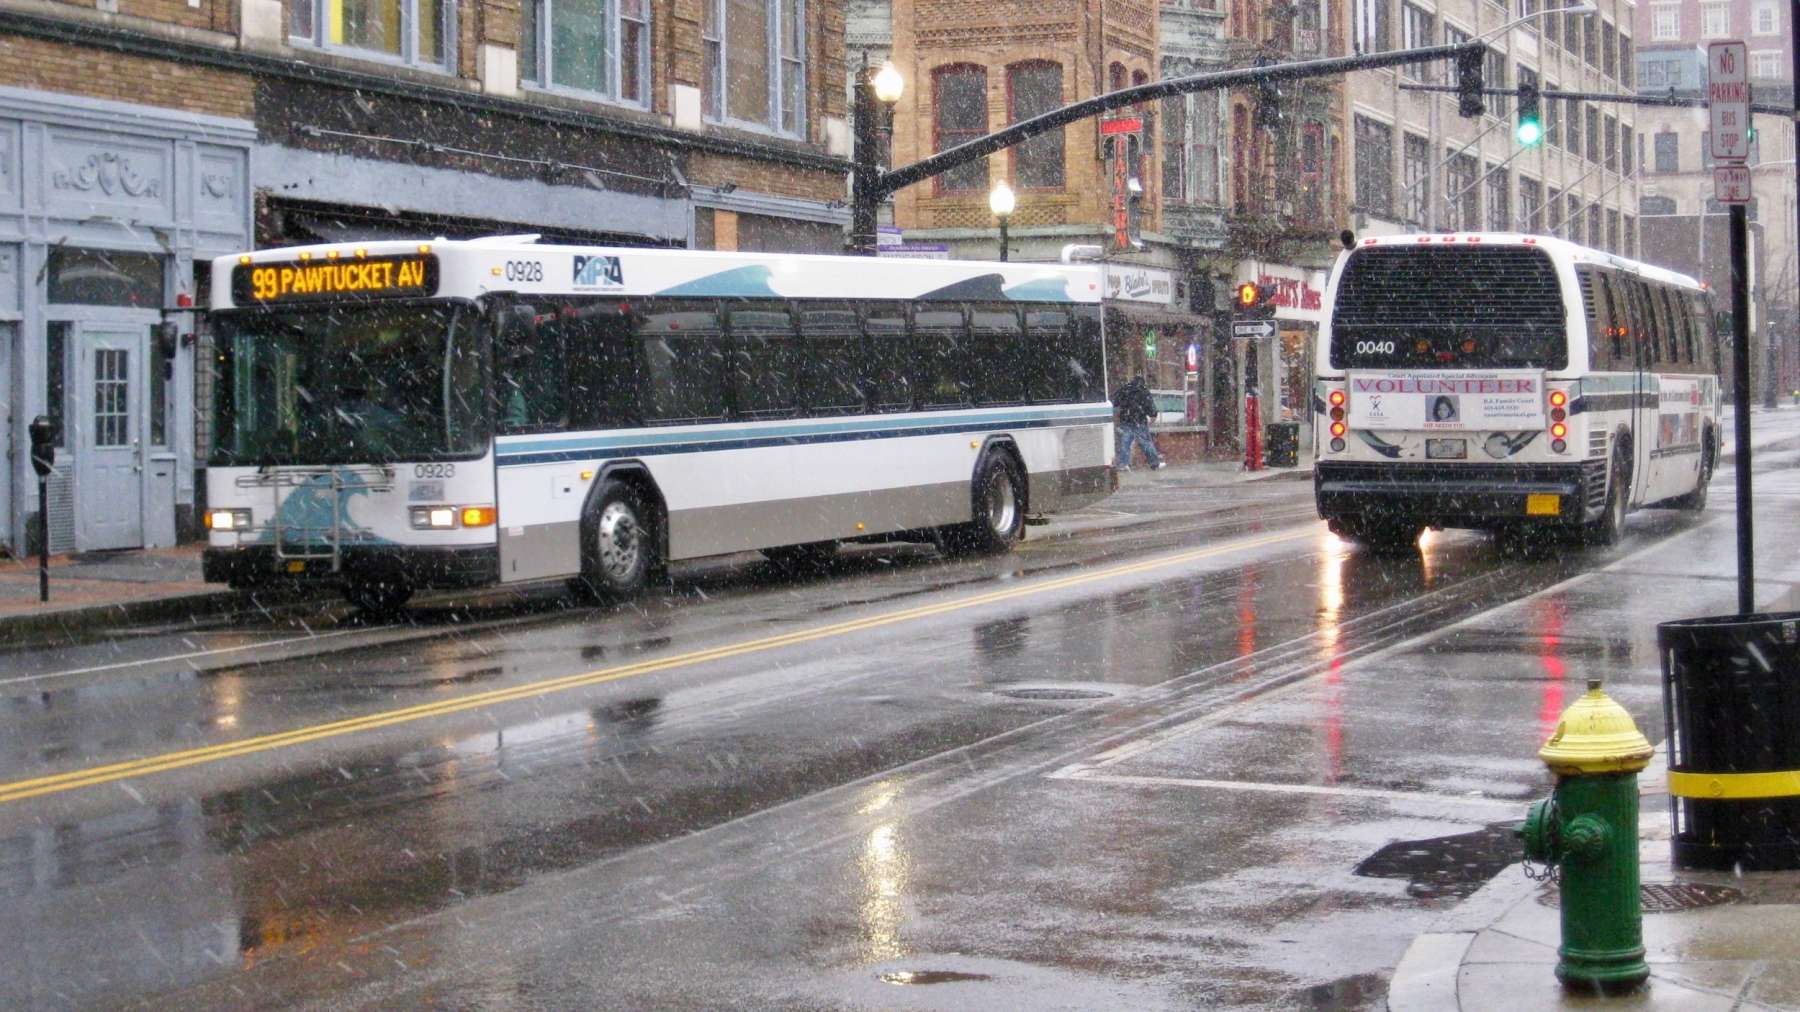 Rhode Island News: RIPTA drivers worry about 25 passenger limit during COVID-19 pandemic